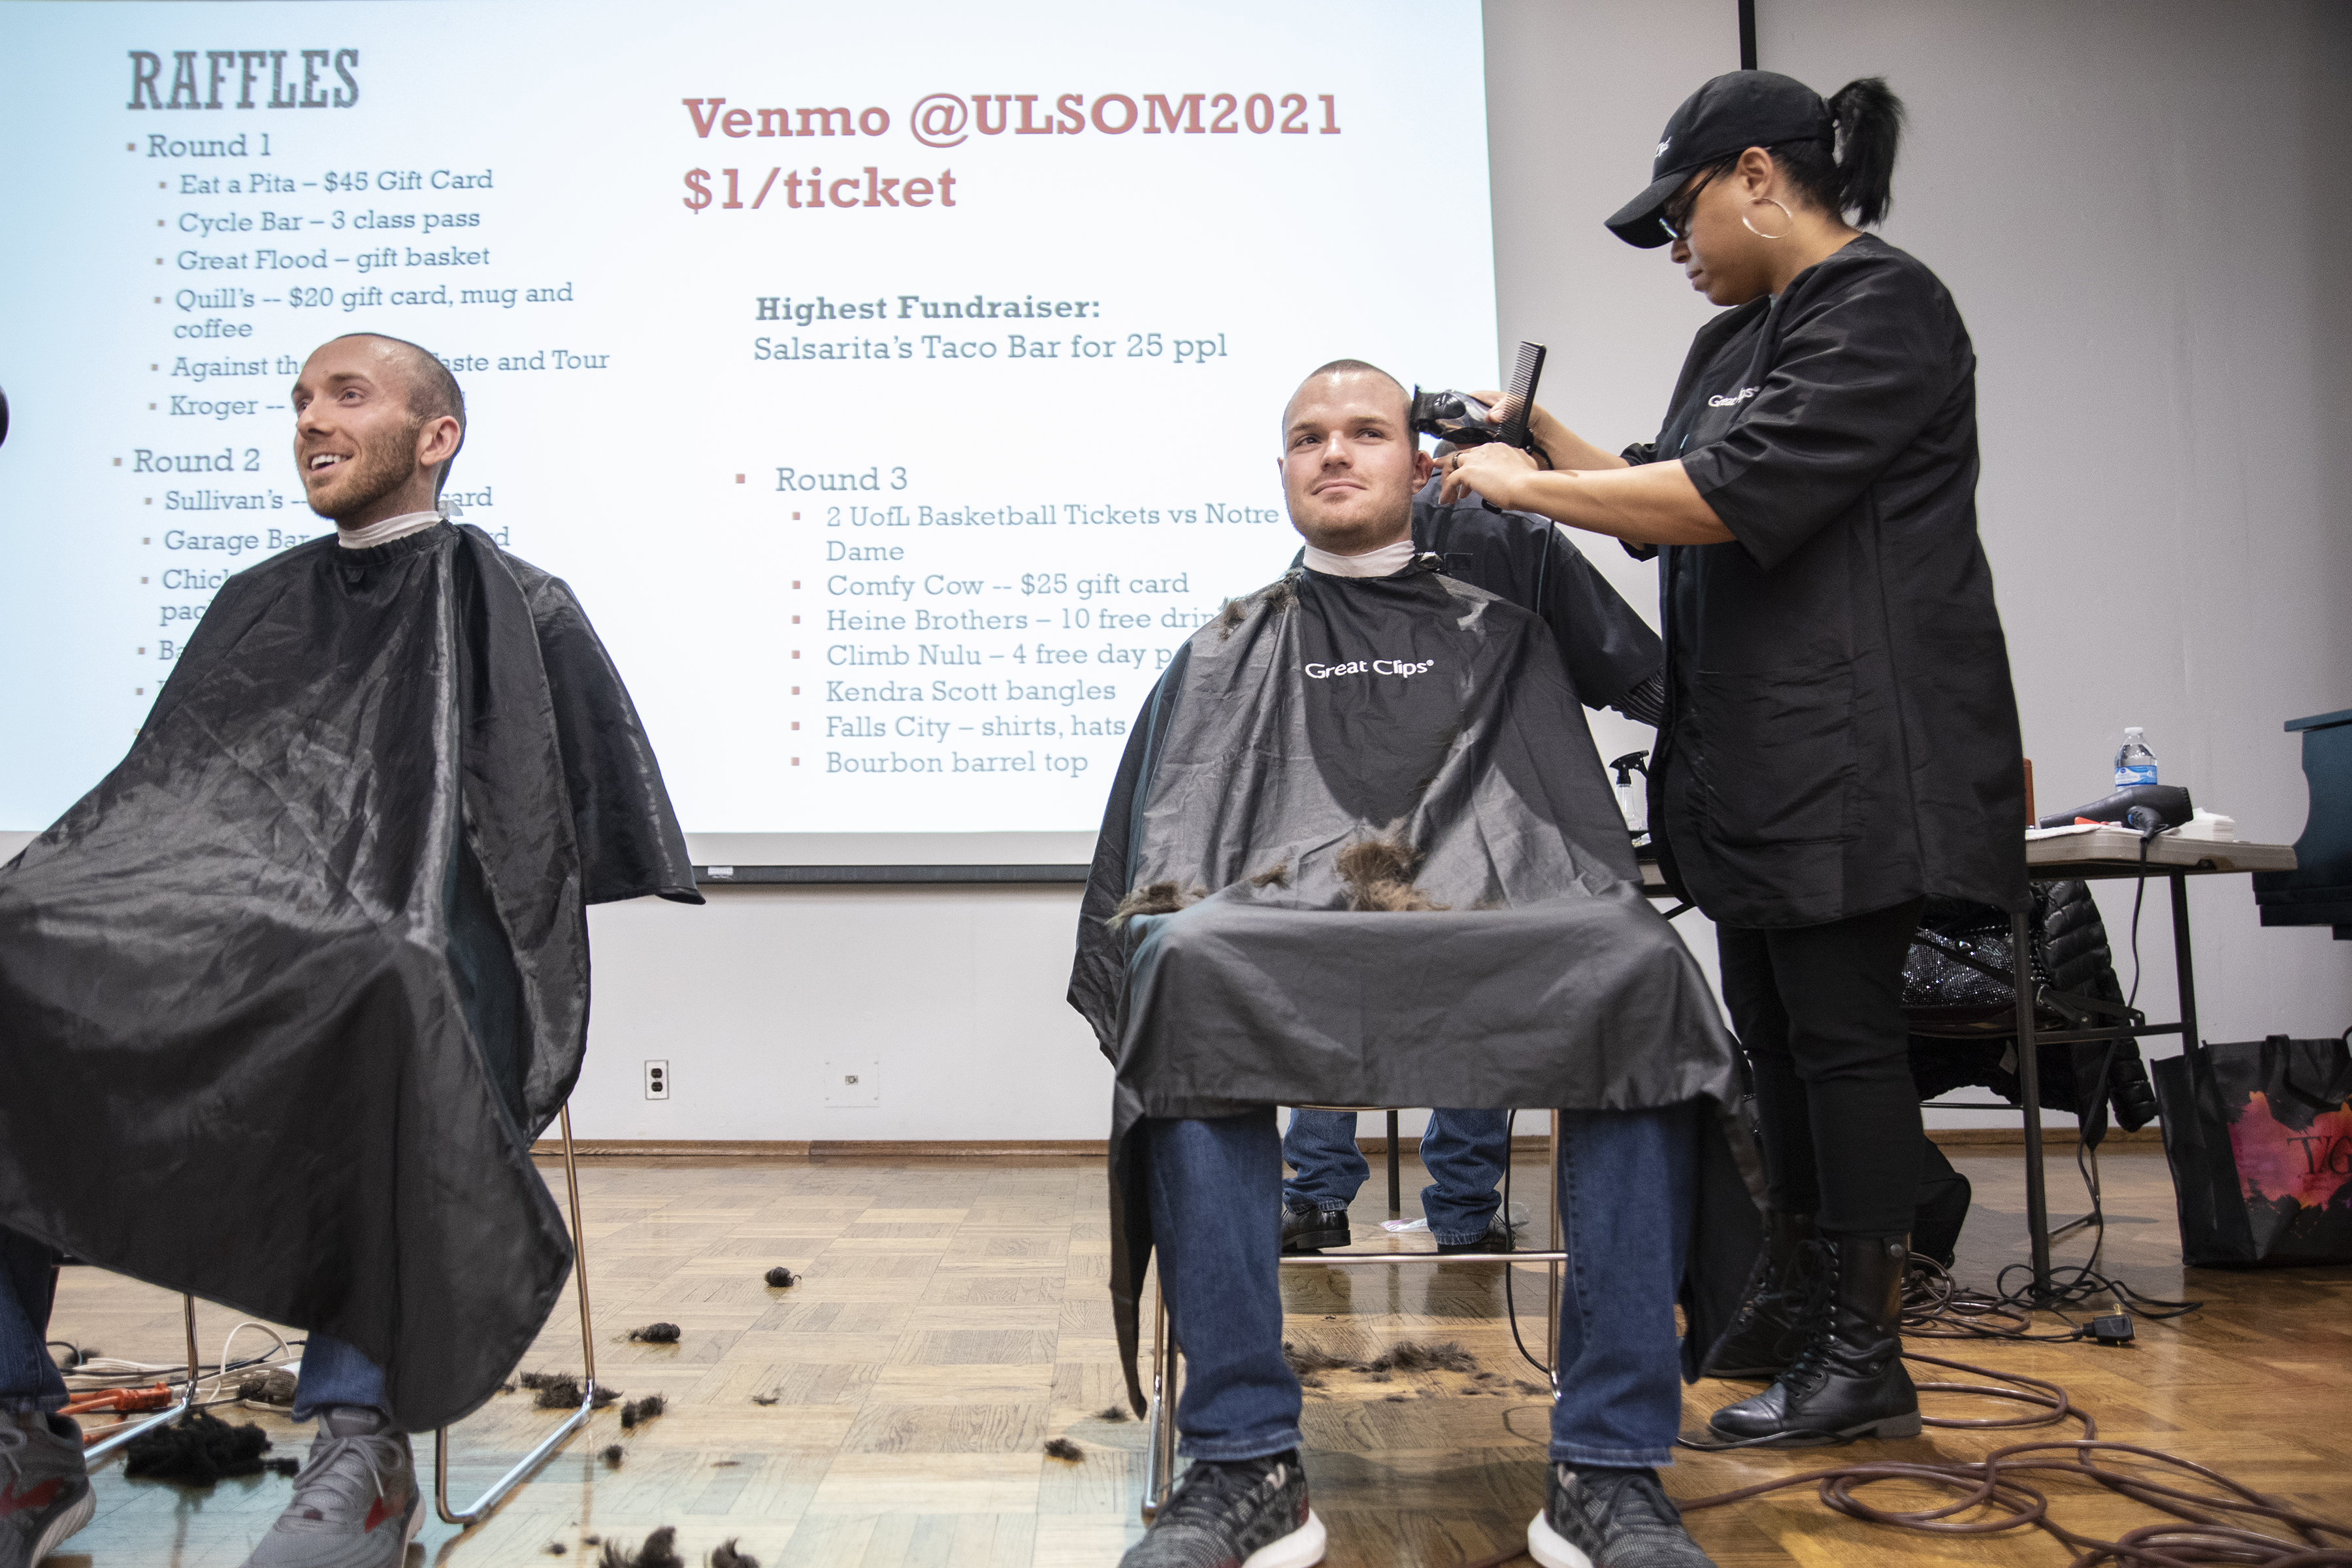 The Shaved Heads event raised more than $3,600 for RaiseRED, and fundraising will continue through Feb. 23 when the campaign culminates in an 18-hour dance marathon.